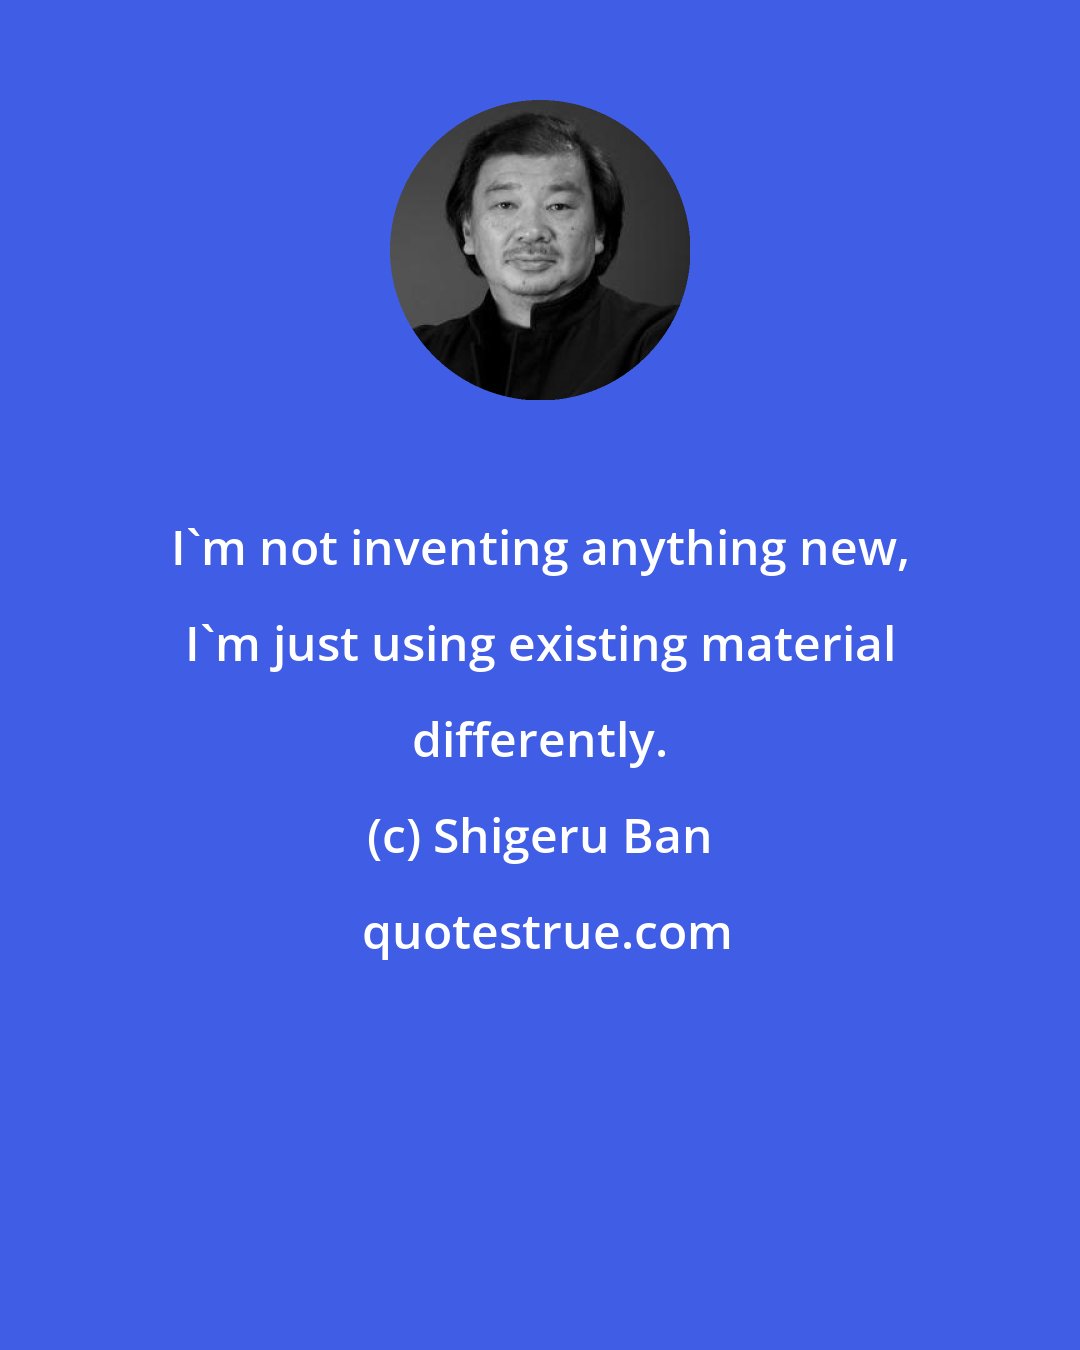 Shigeru Ban: I'm not inventing anything new, I'm just using existing material differently.